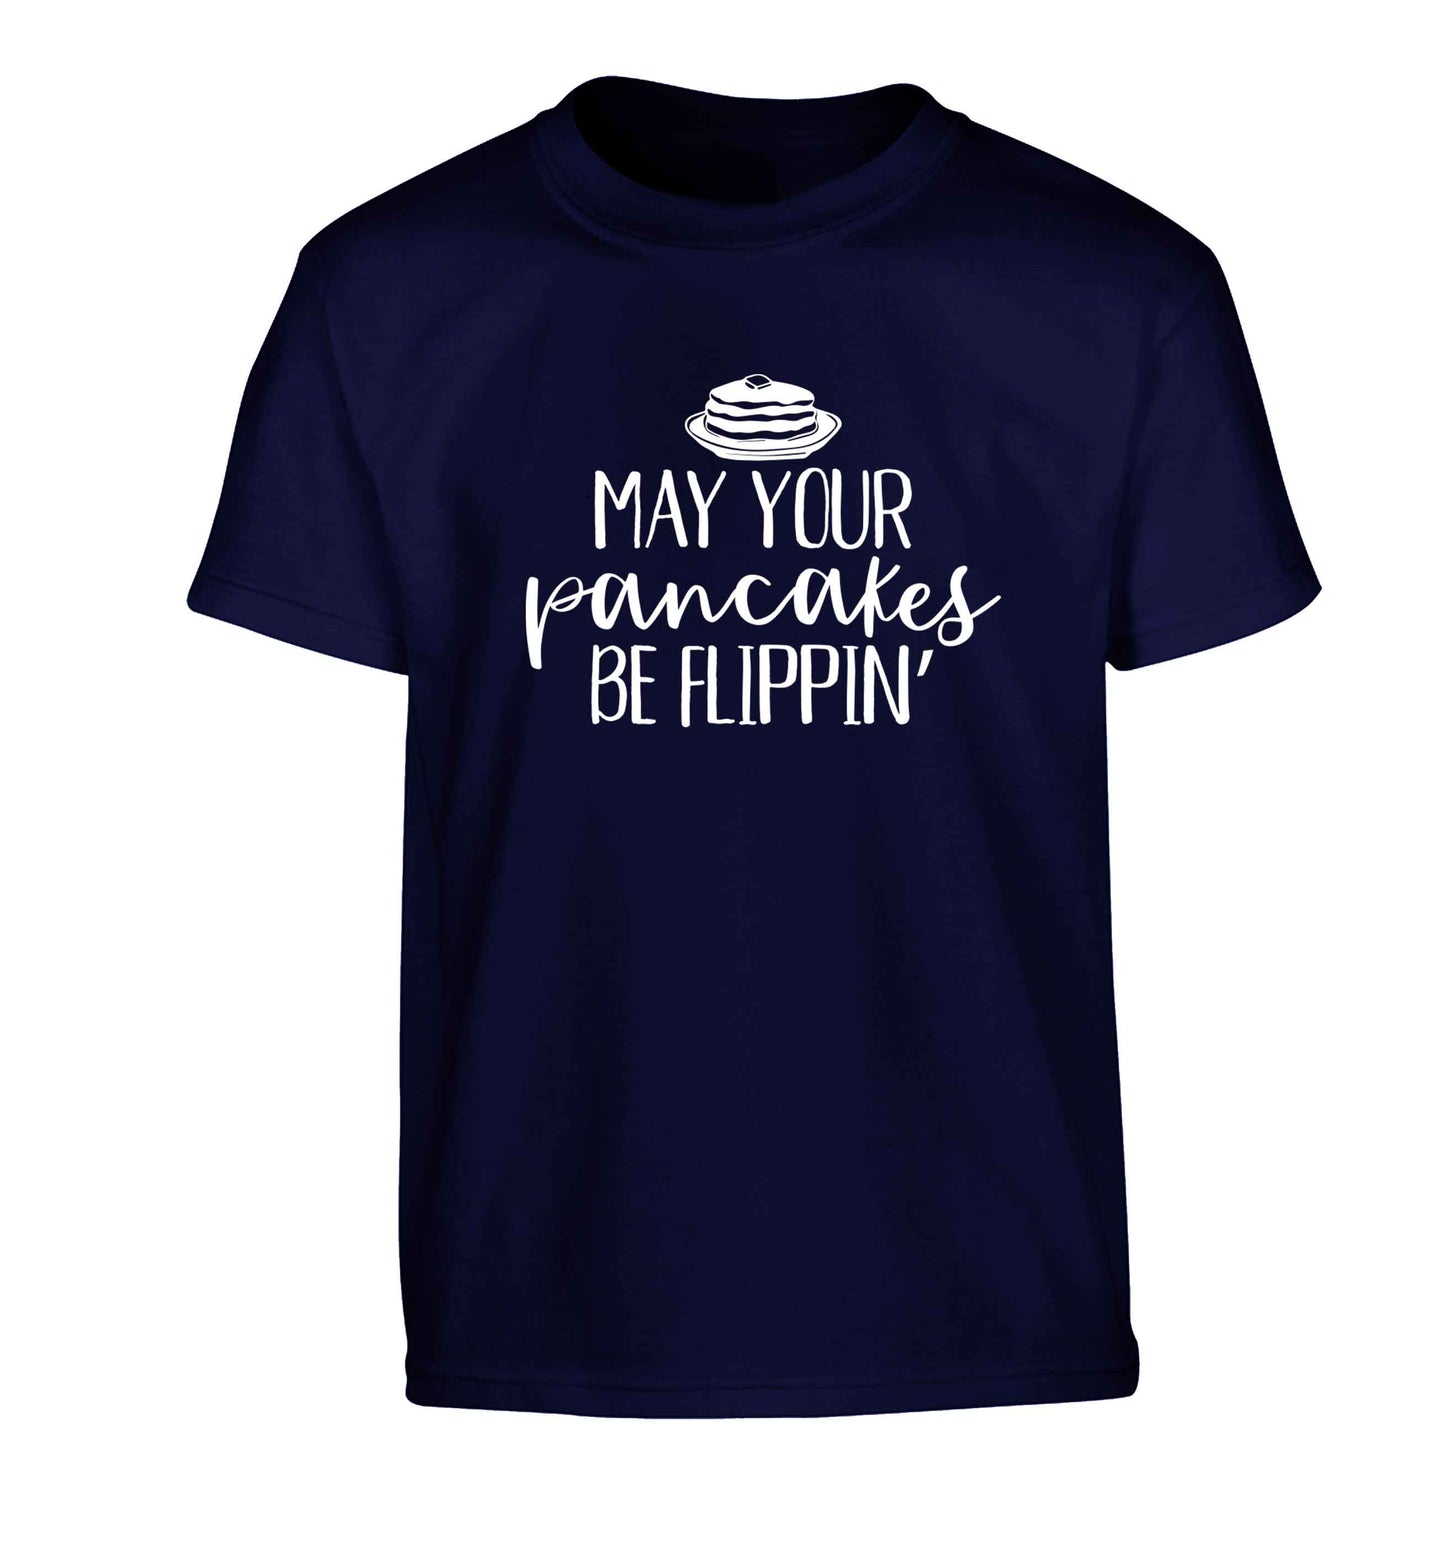 May your pancakes be flippin' Children's navy Tshirt 12-13 Years